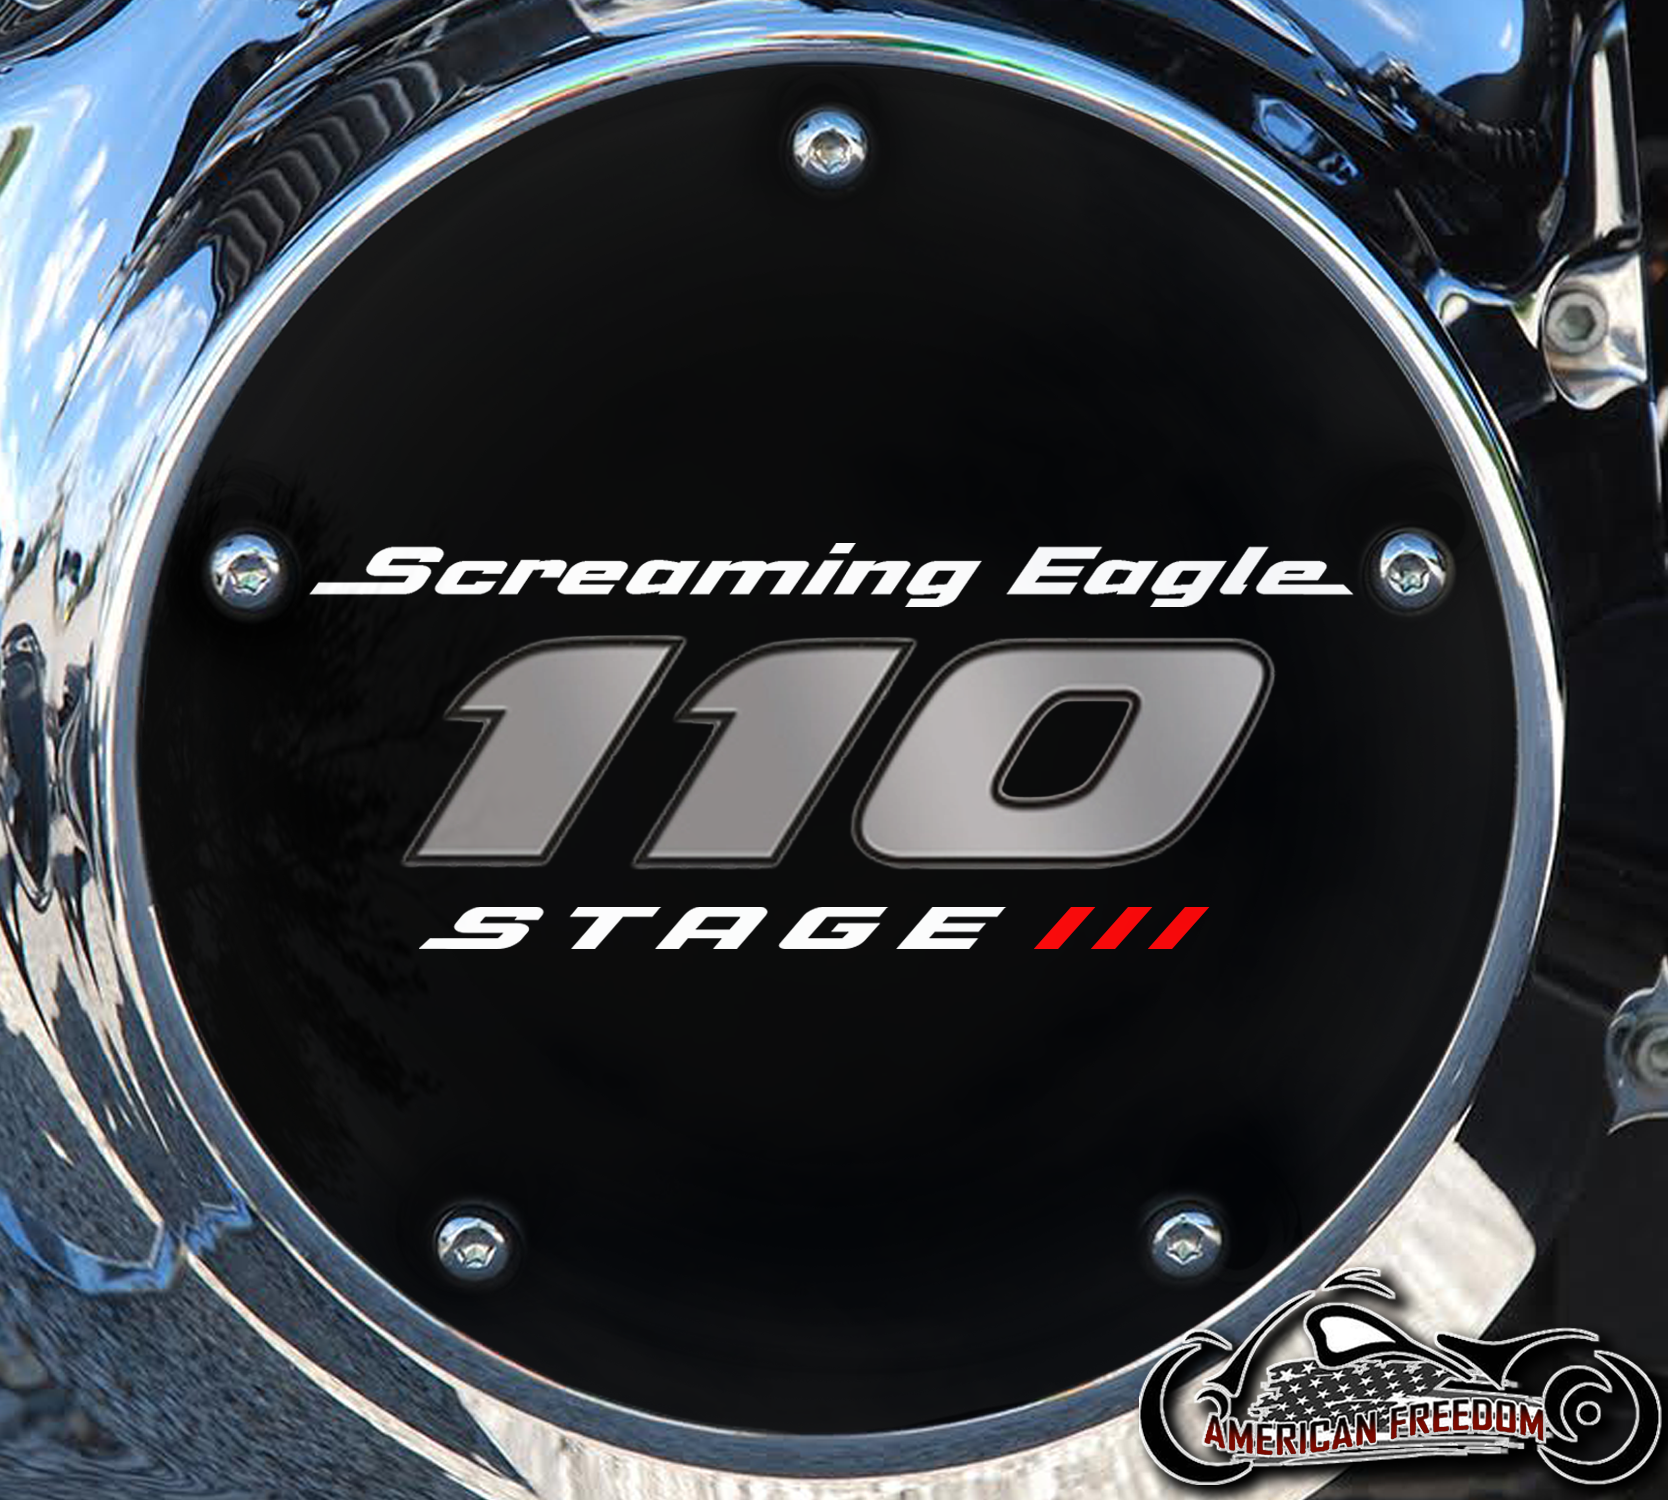 Screaming Eagle Stage III 110 Derby Cover